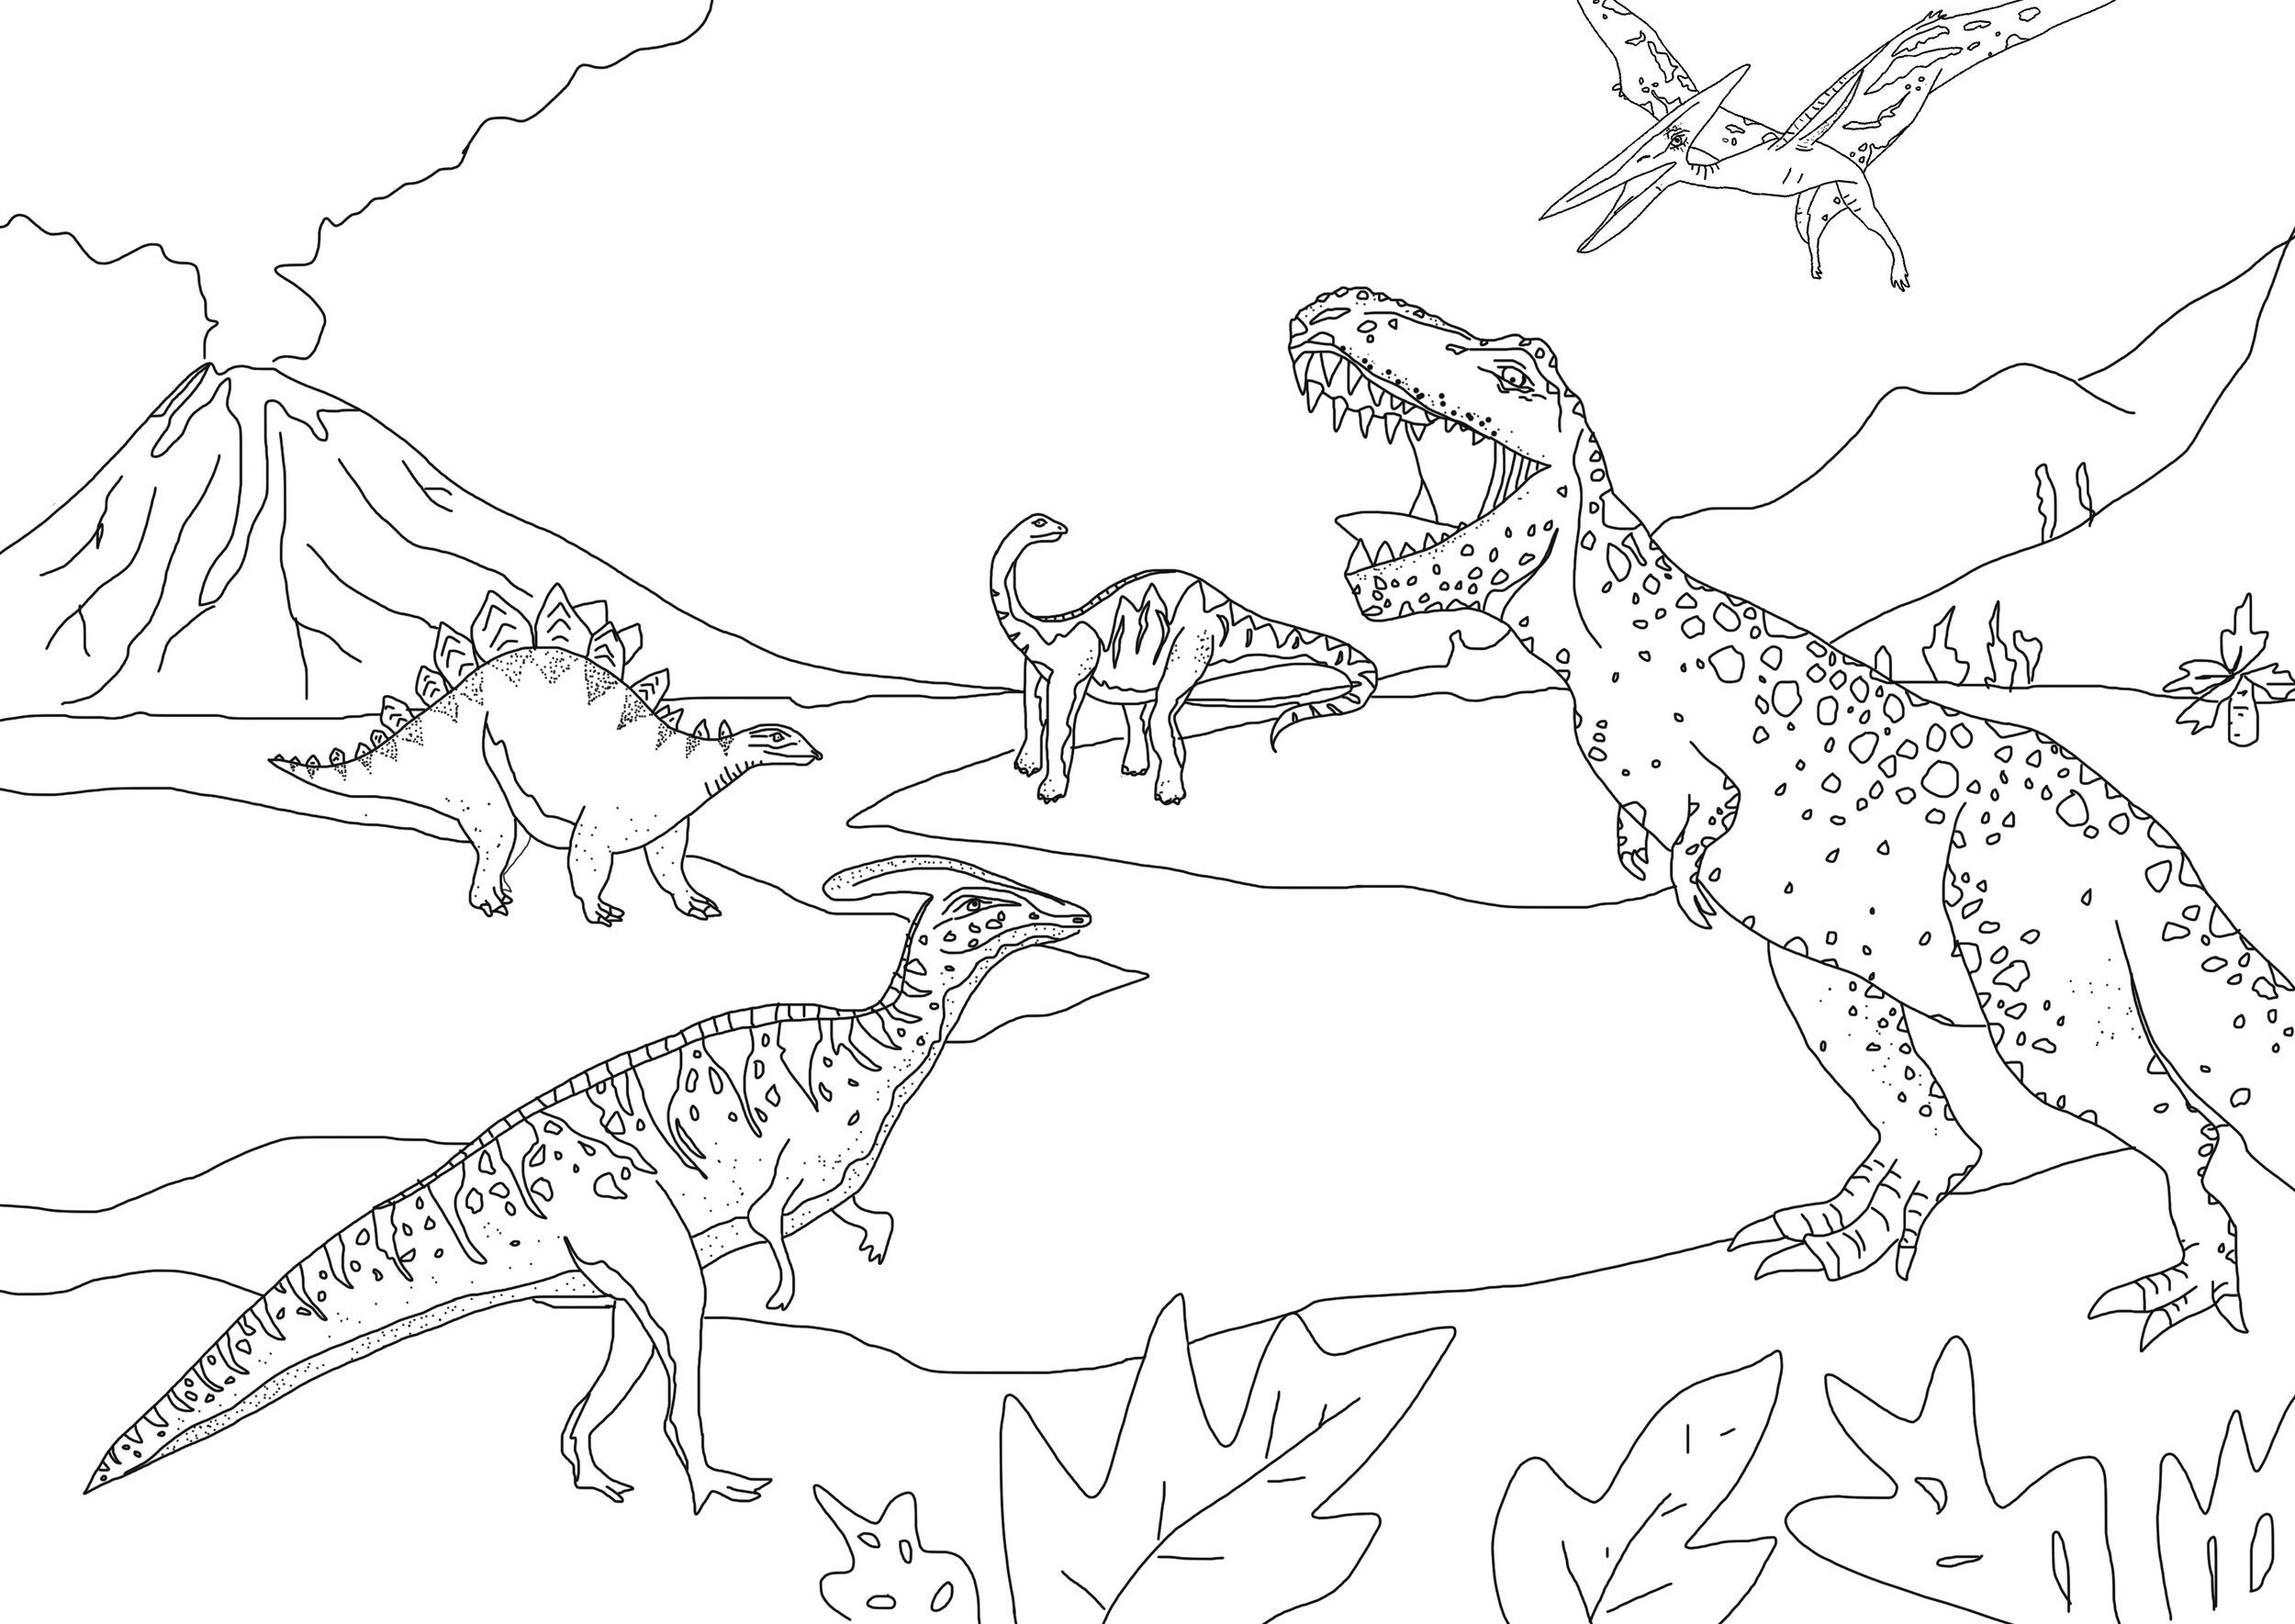 Drawing and Coloring Dinosaurs Big Collection  Jurassic Park Dinosaurs  Color Pages for Kids  YouTube